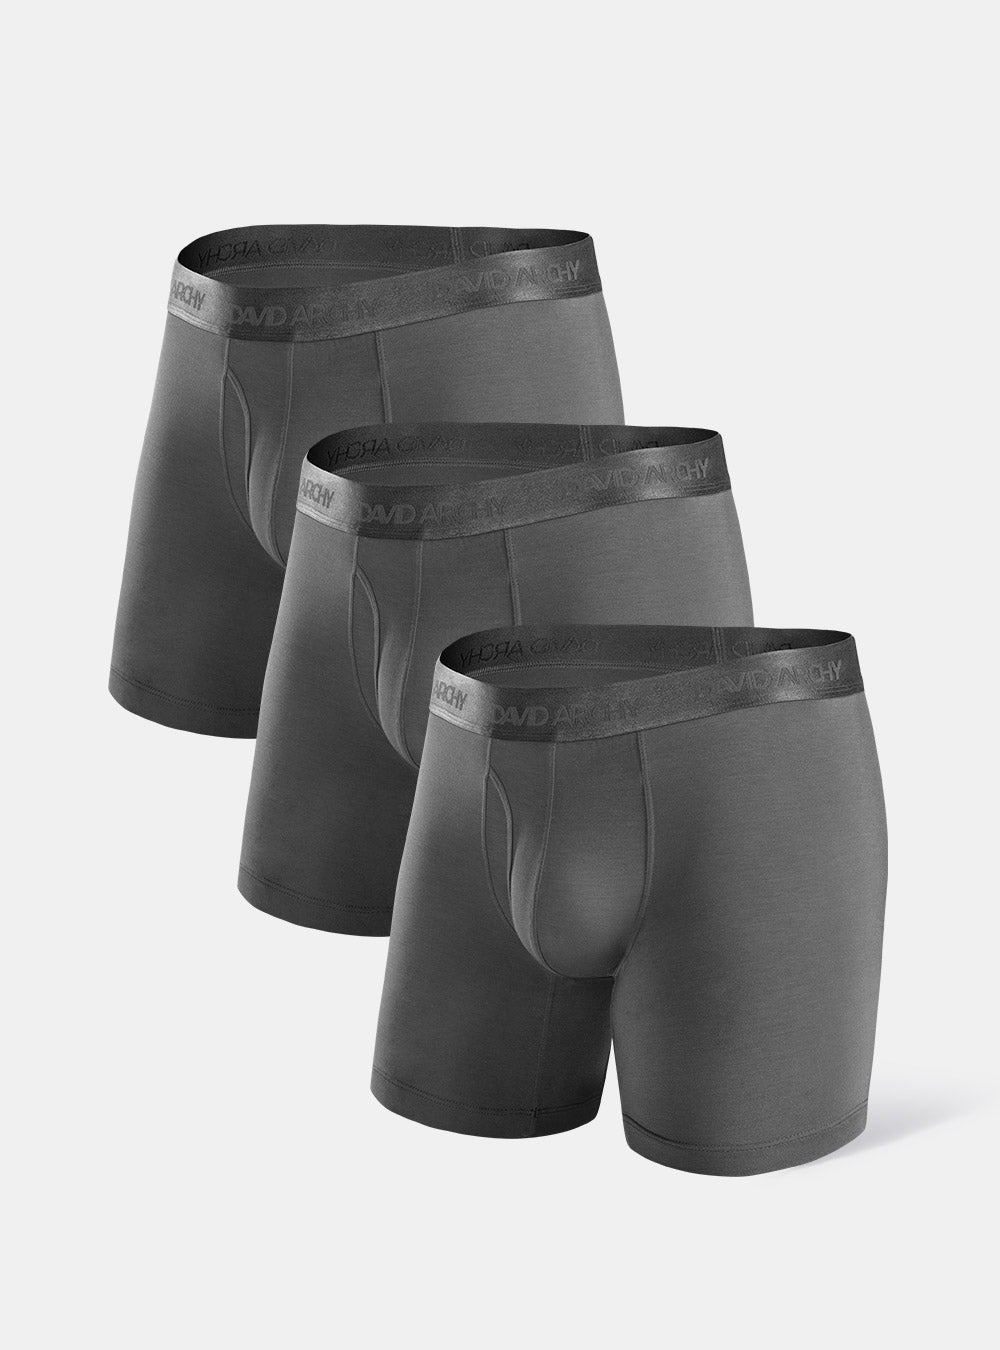 3 Packs Boxer Briefs Separate Pouch Modal David Archy Comfortable